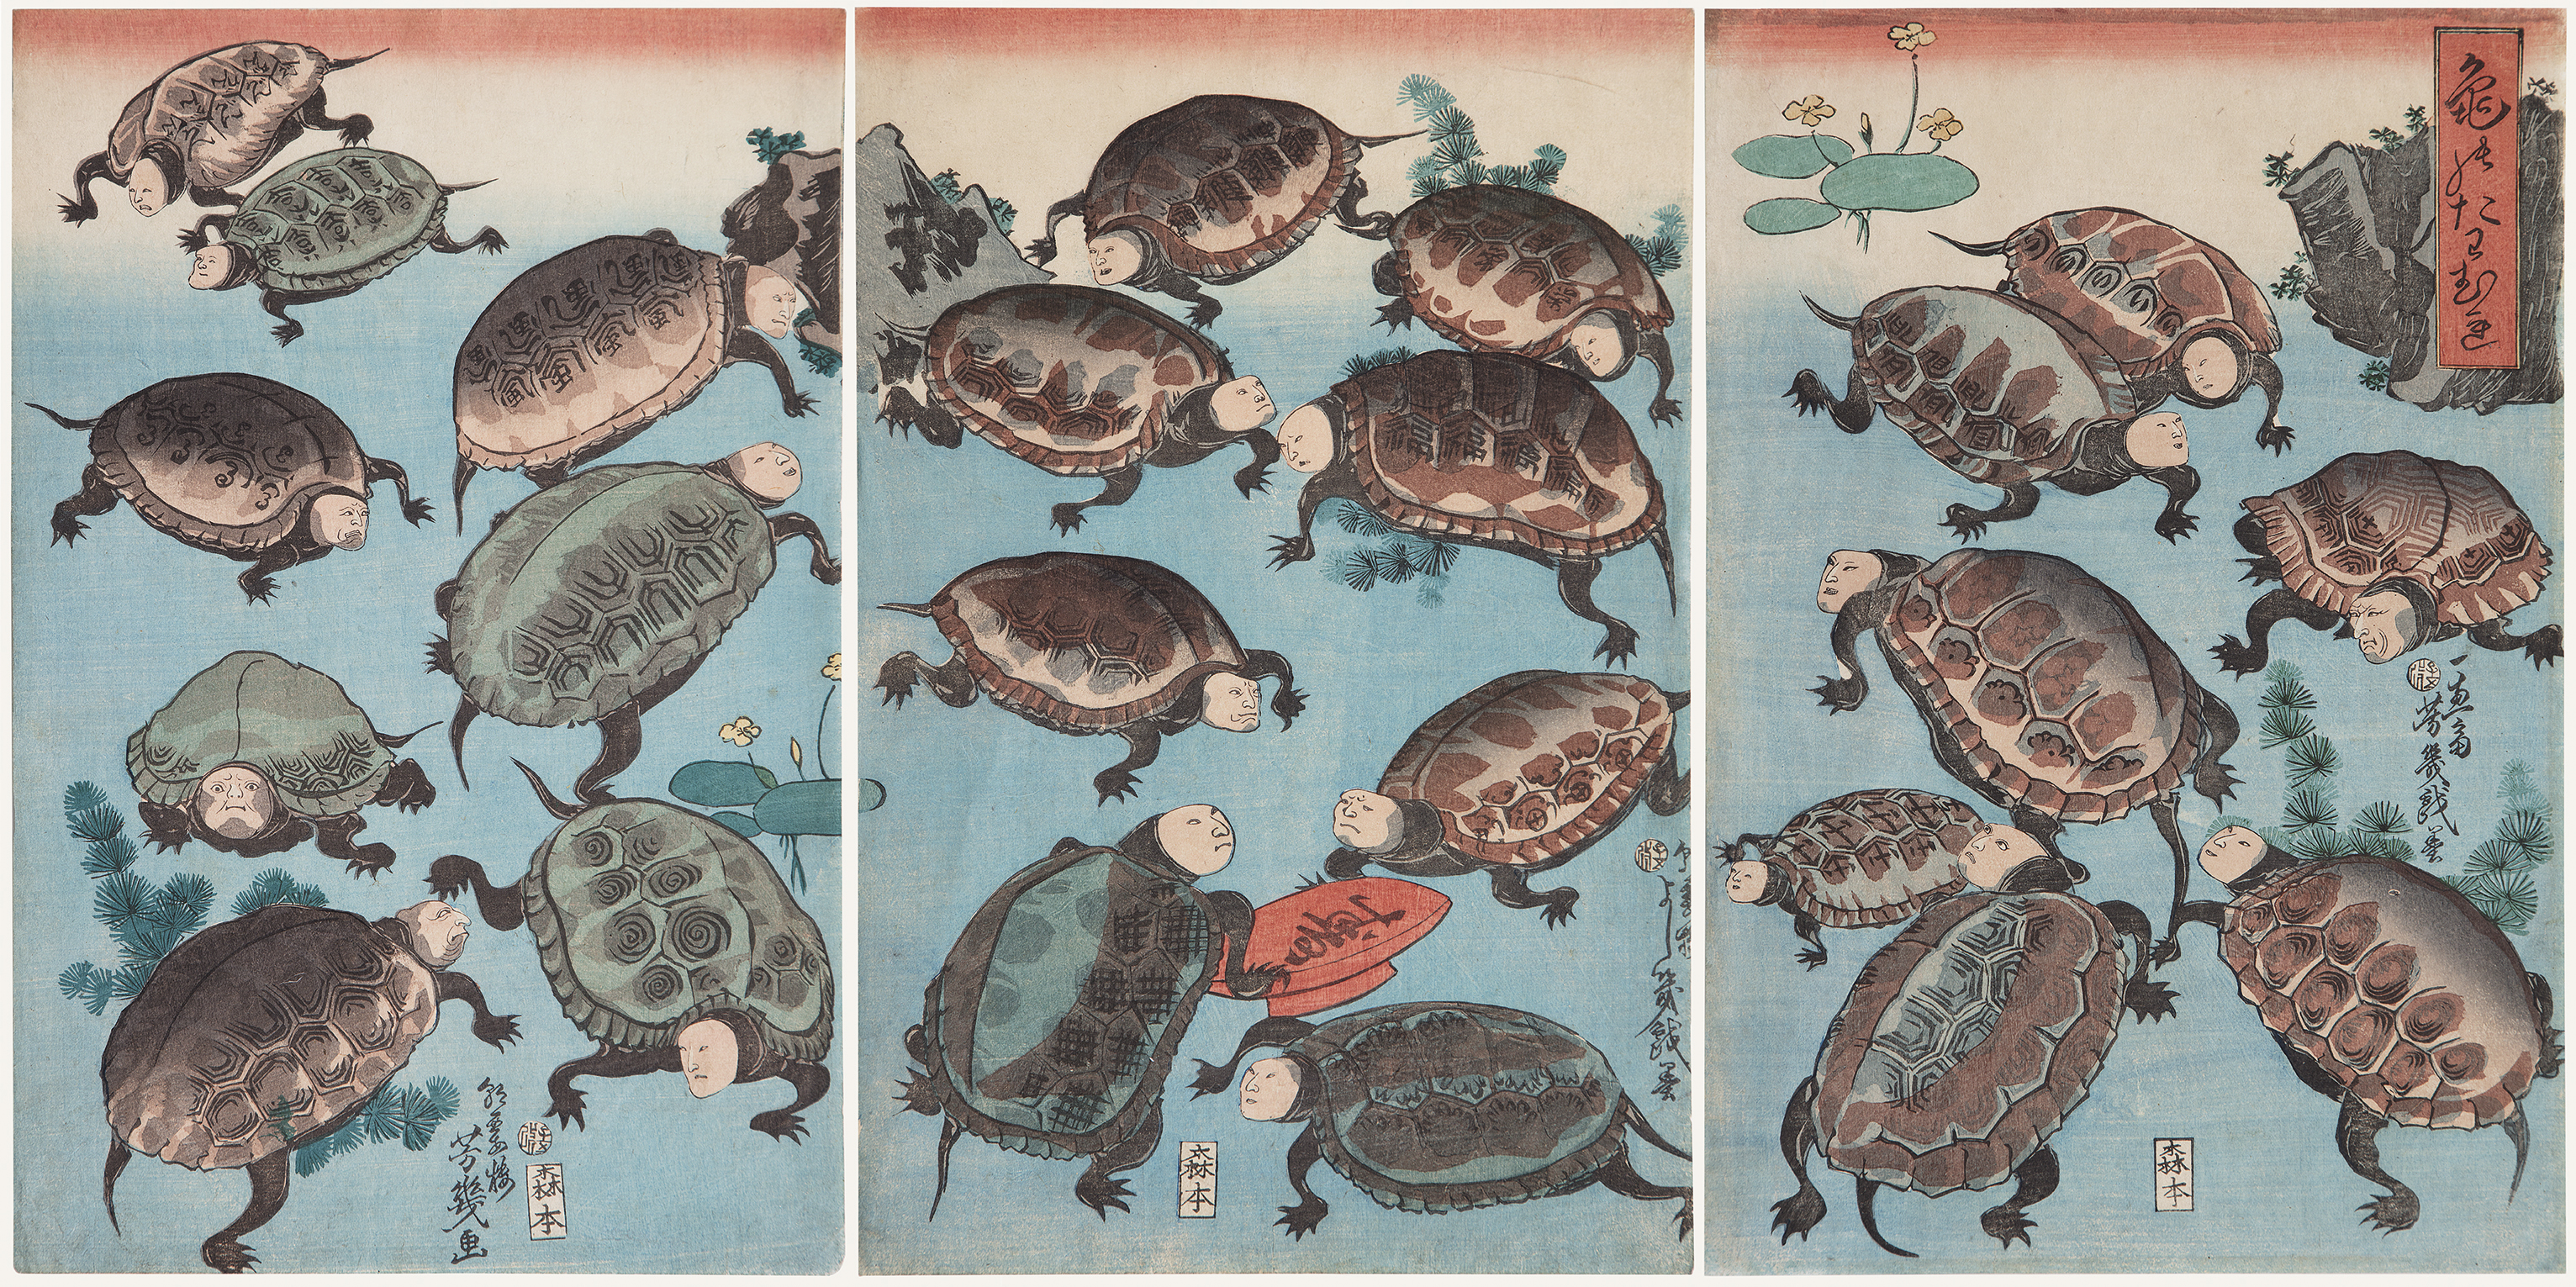 Kabuki actors portaide as turtles in a pond with a red cup for the sakè, marked by the character longevity 